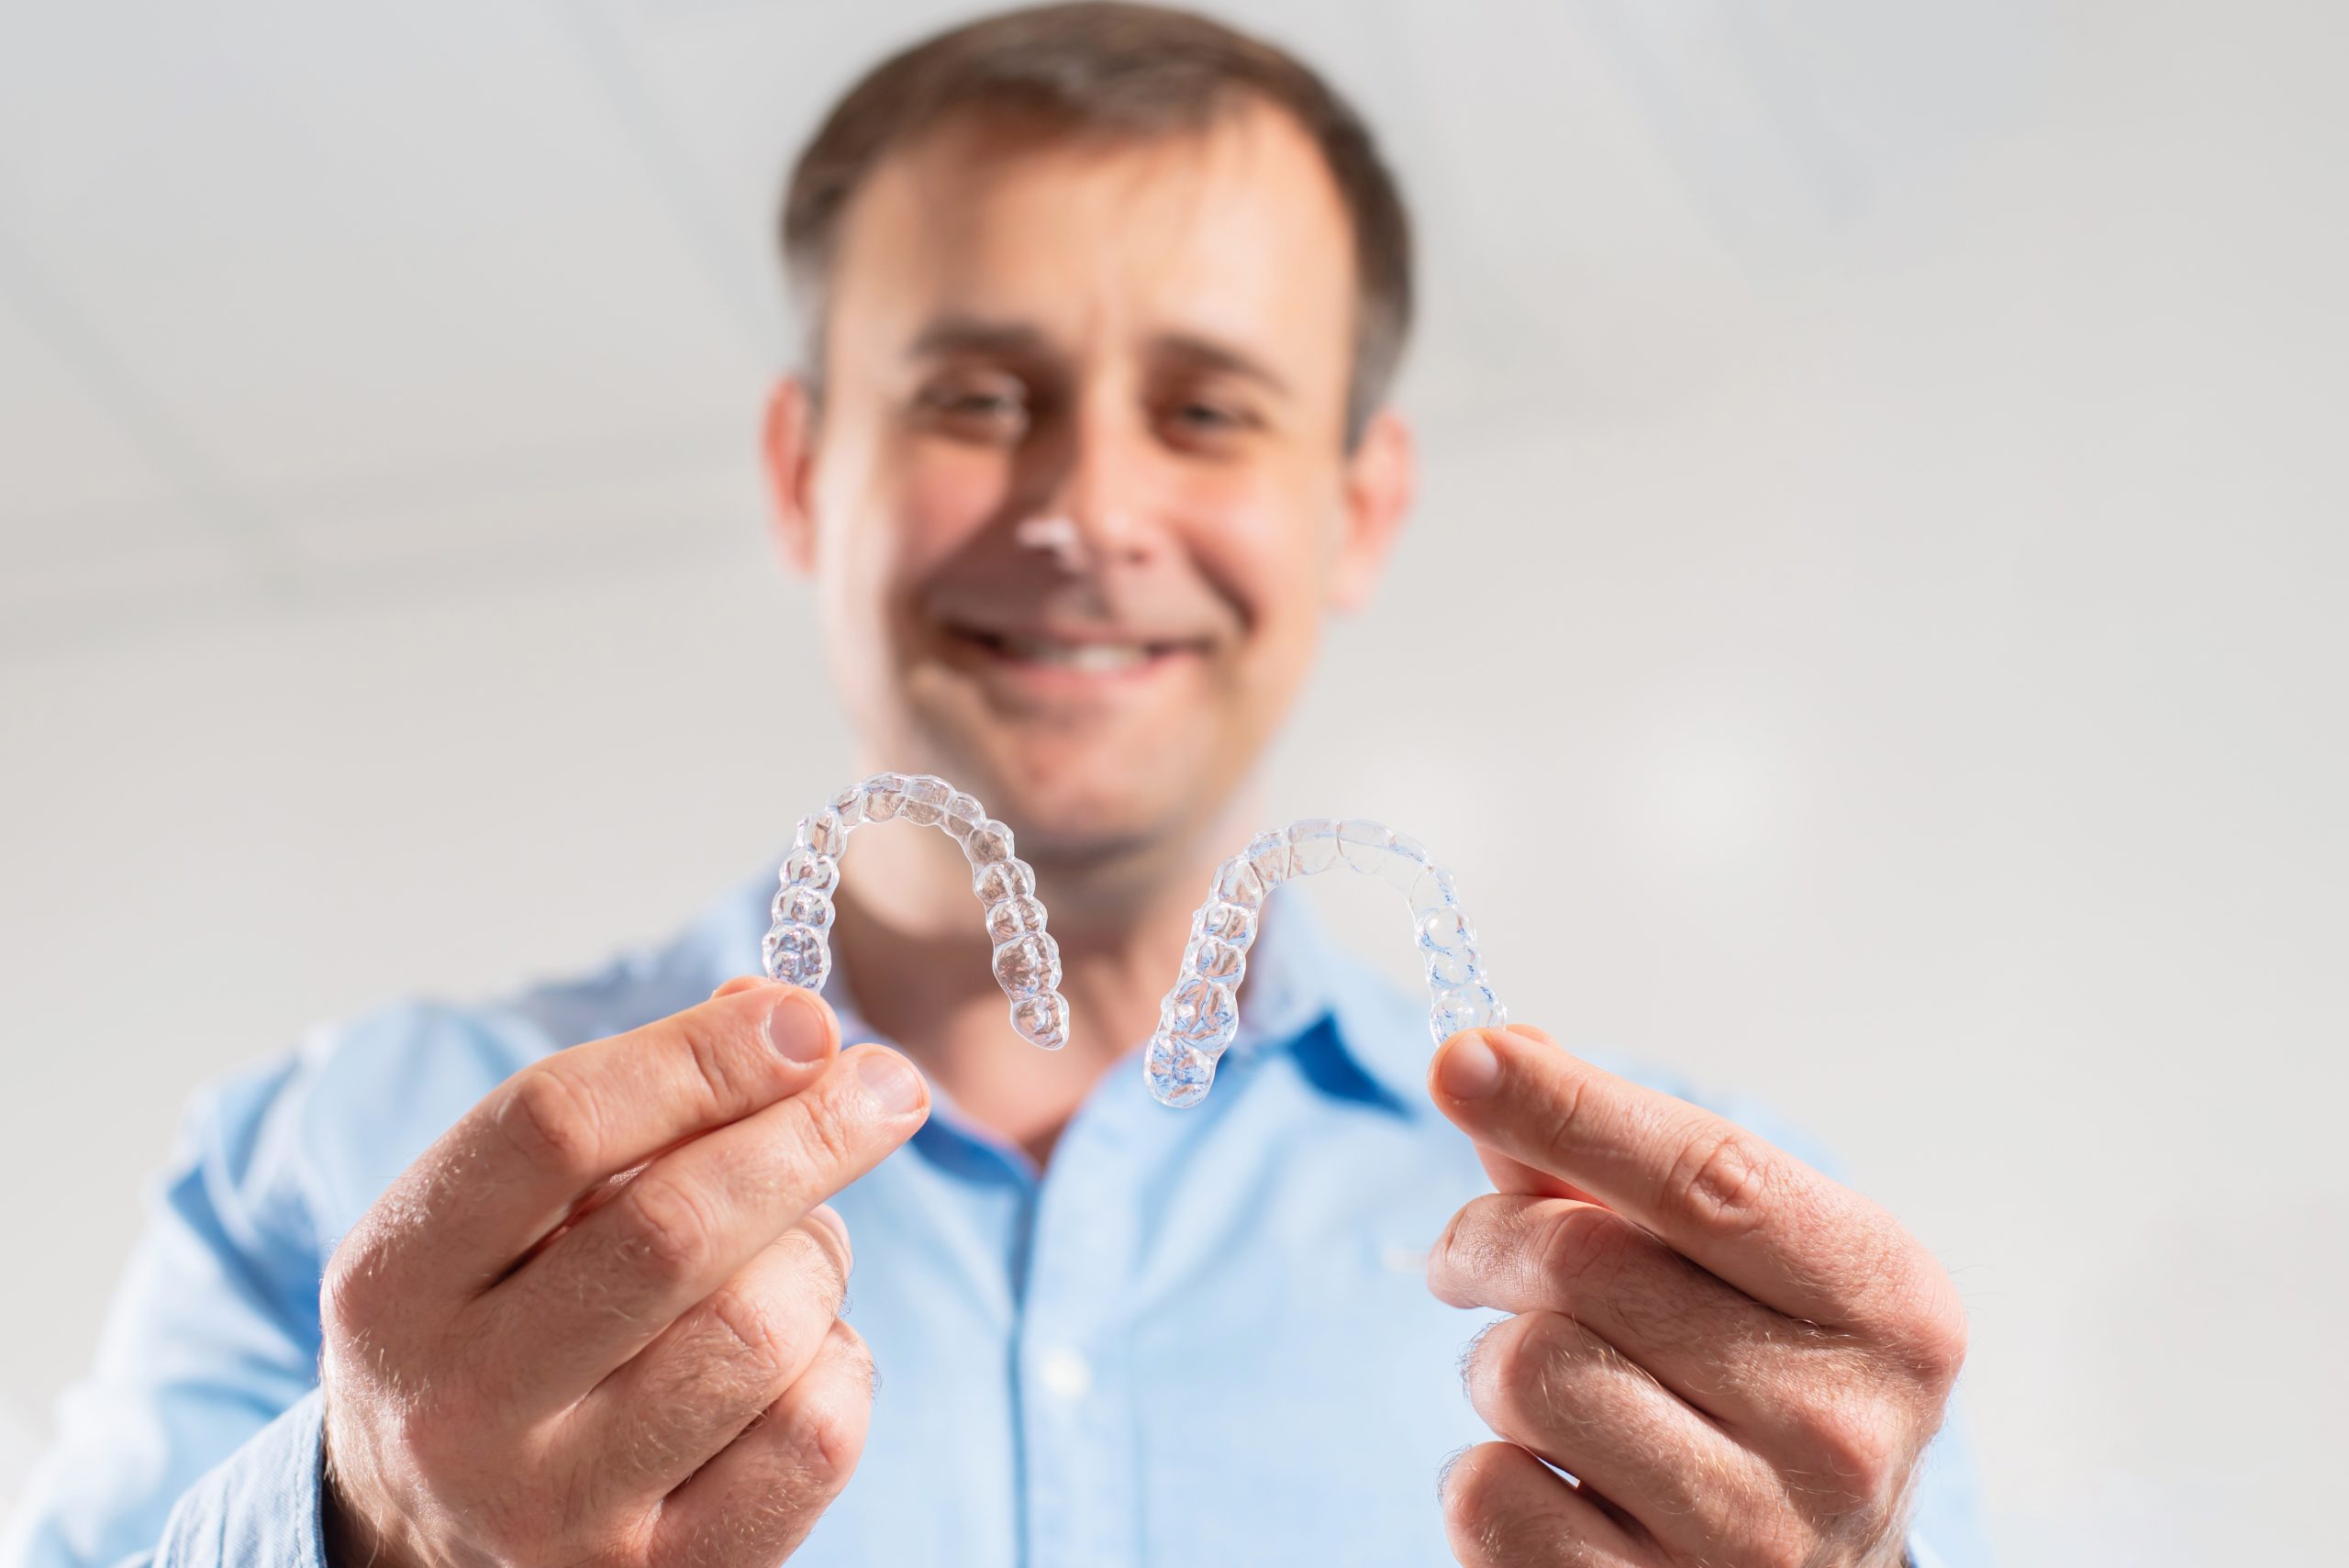 Smiling man in a blue button-down shirt holding an Invisalign aligner in each one of his hands with outstretched arms.